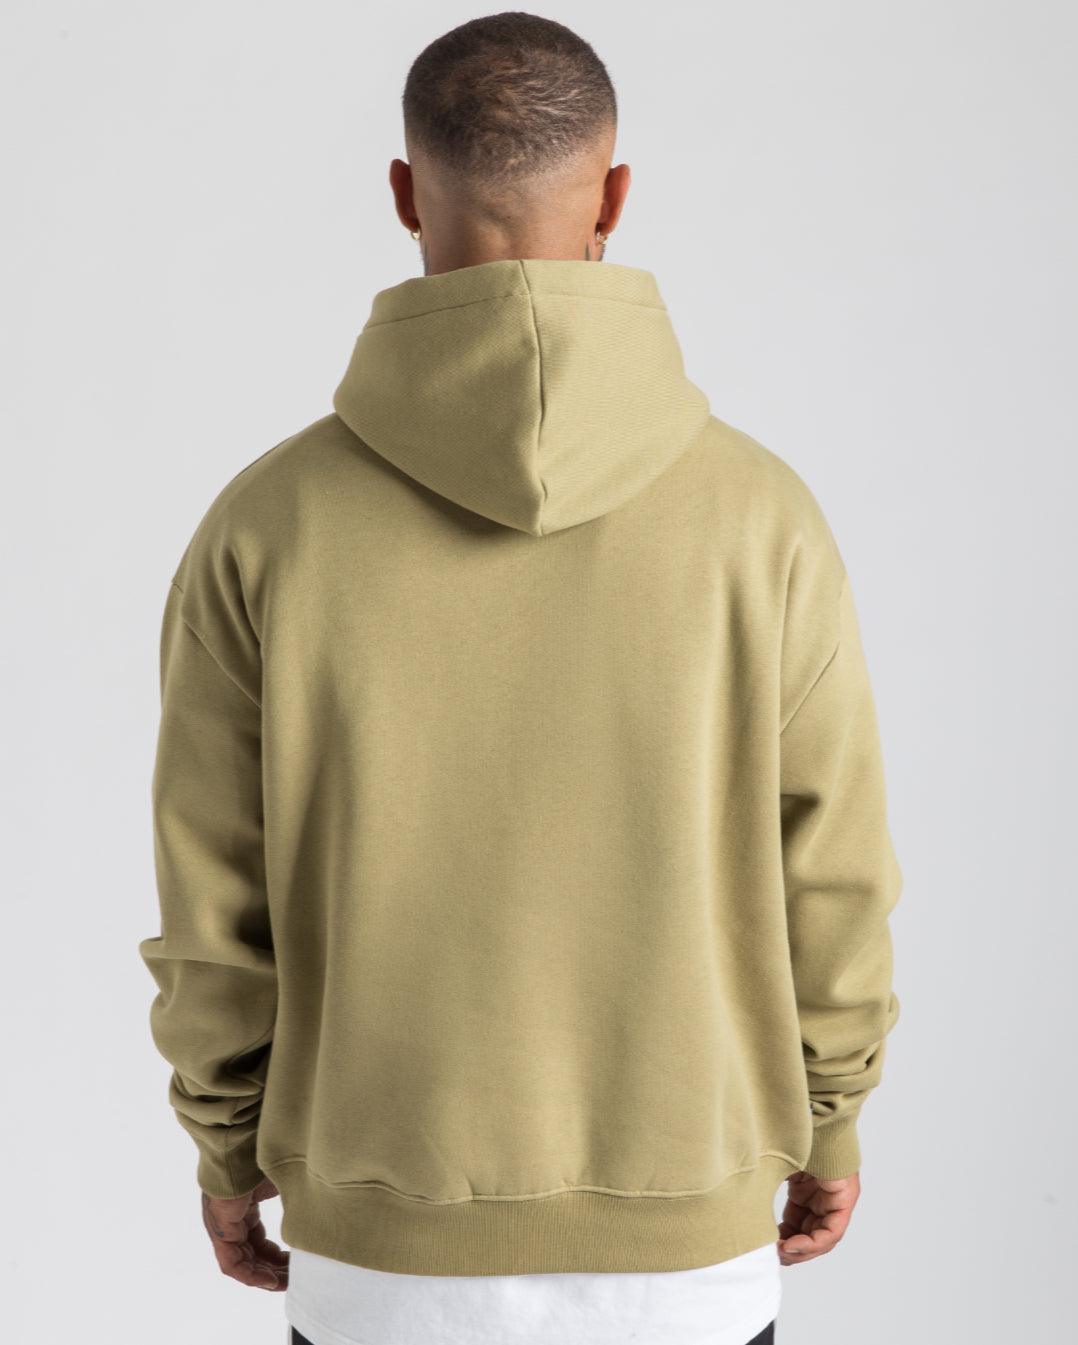 FASTNBRIGHT Hoodie - FAST AND BRIGHT